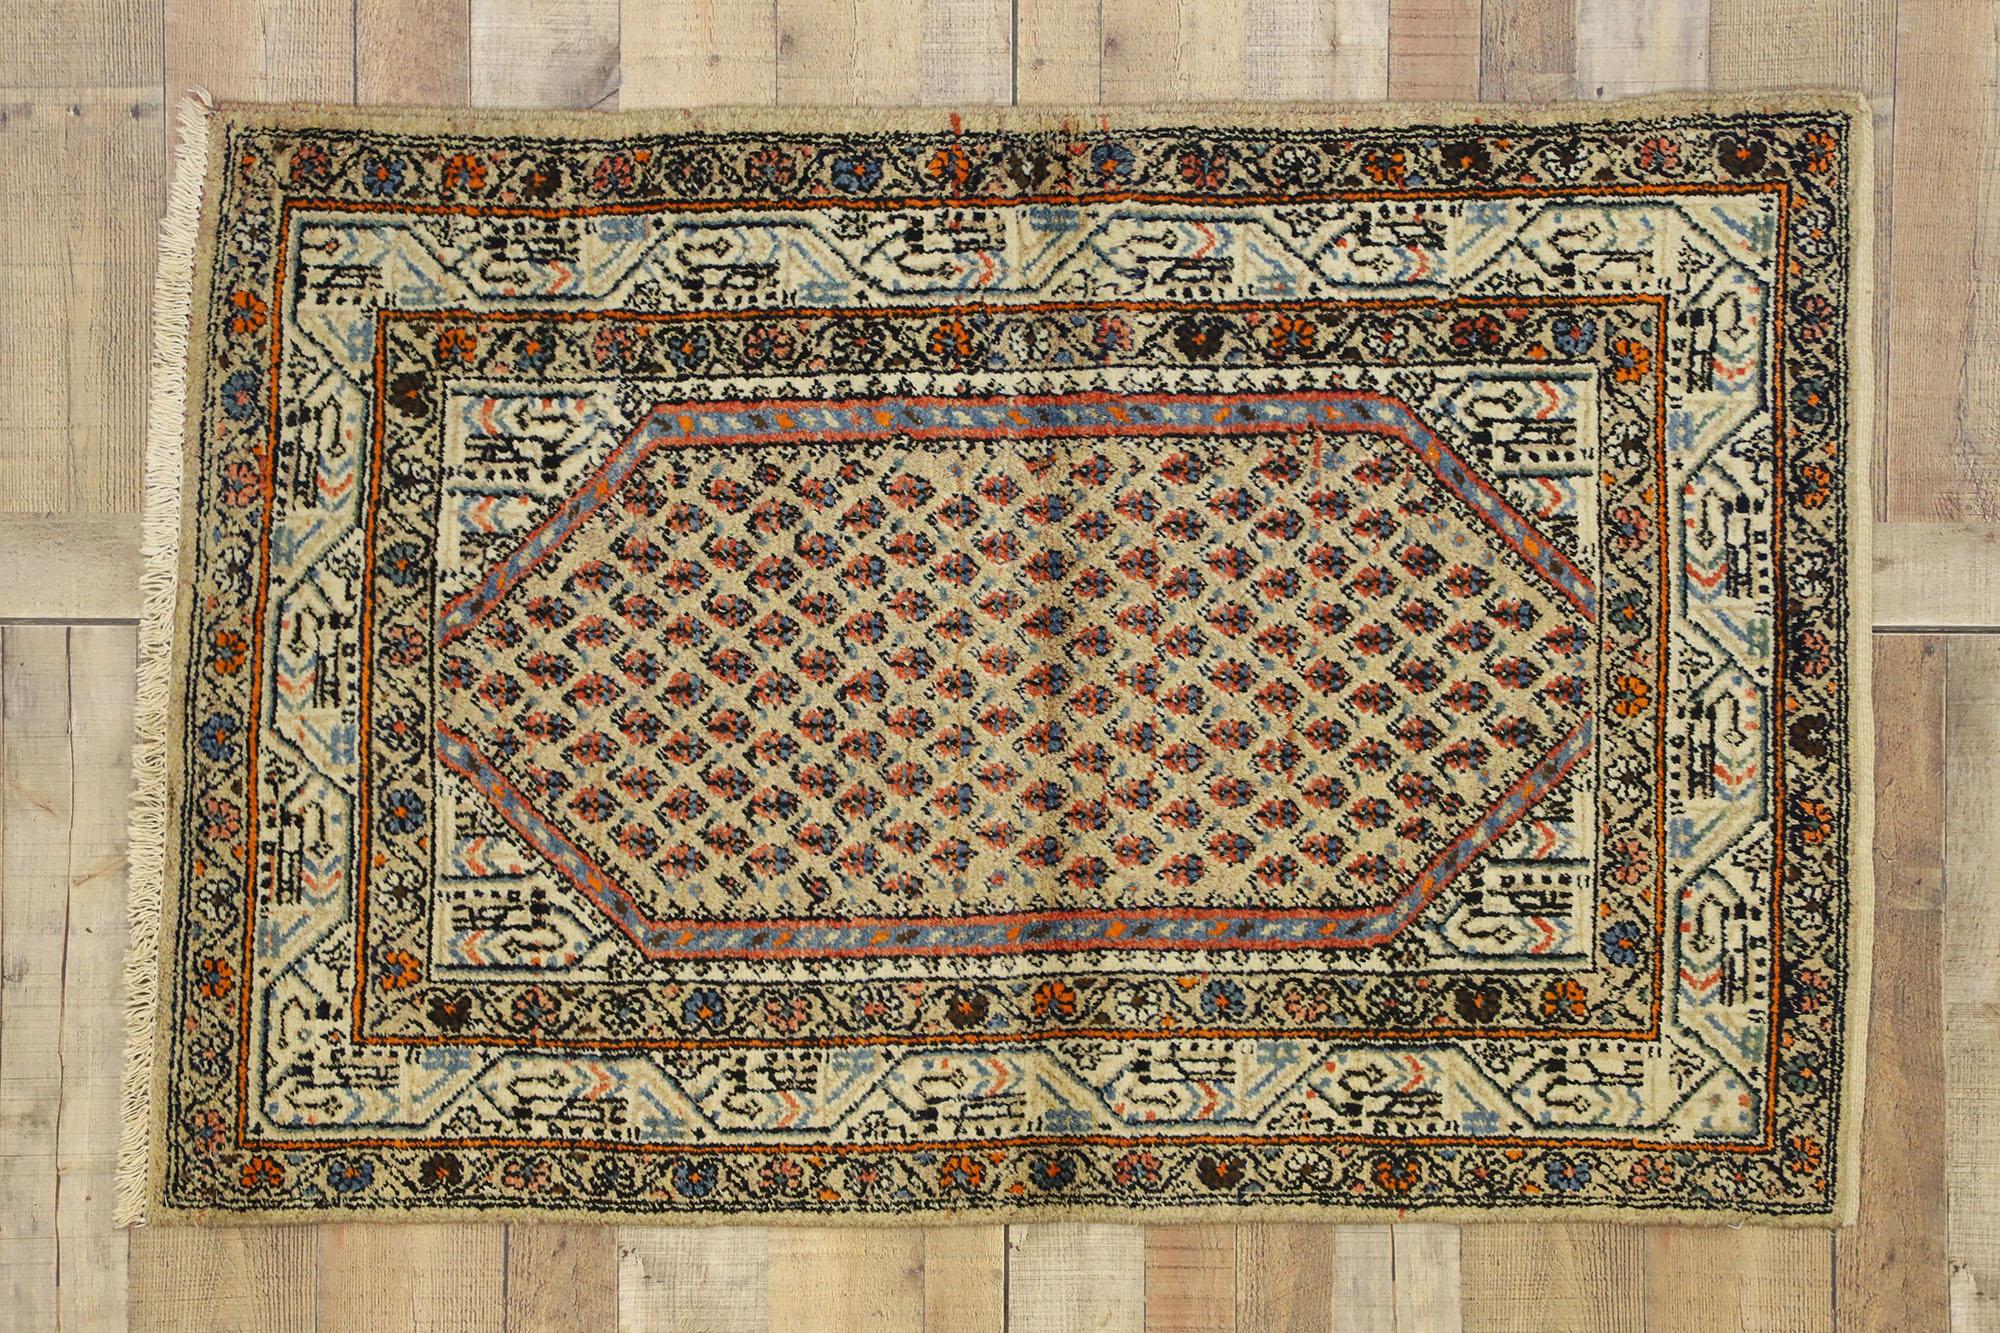 72632, antique Persian Saraband rug with Mir Boteh design. The antique Persian Saraband rug features a delicate pattern of Mir boteh motifs in diagonal rows in a beige field. The boteh resembles sprouting seed and is known as the 